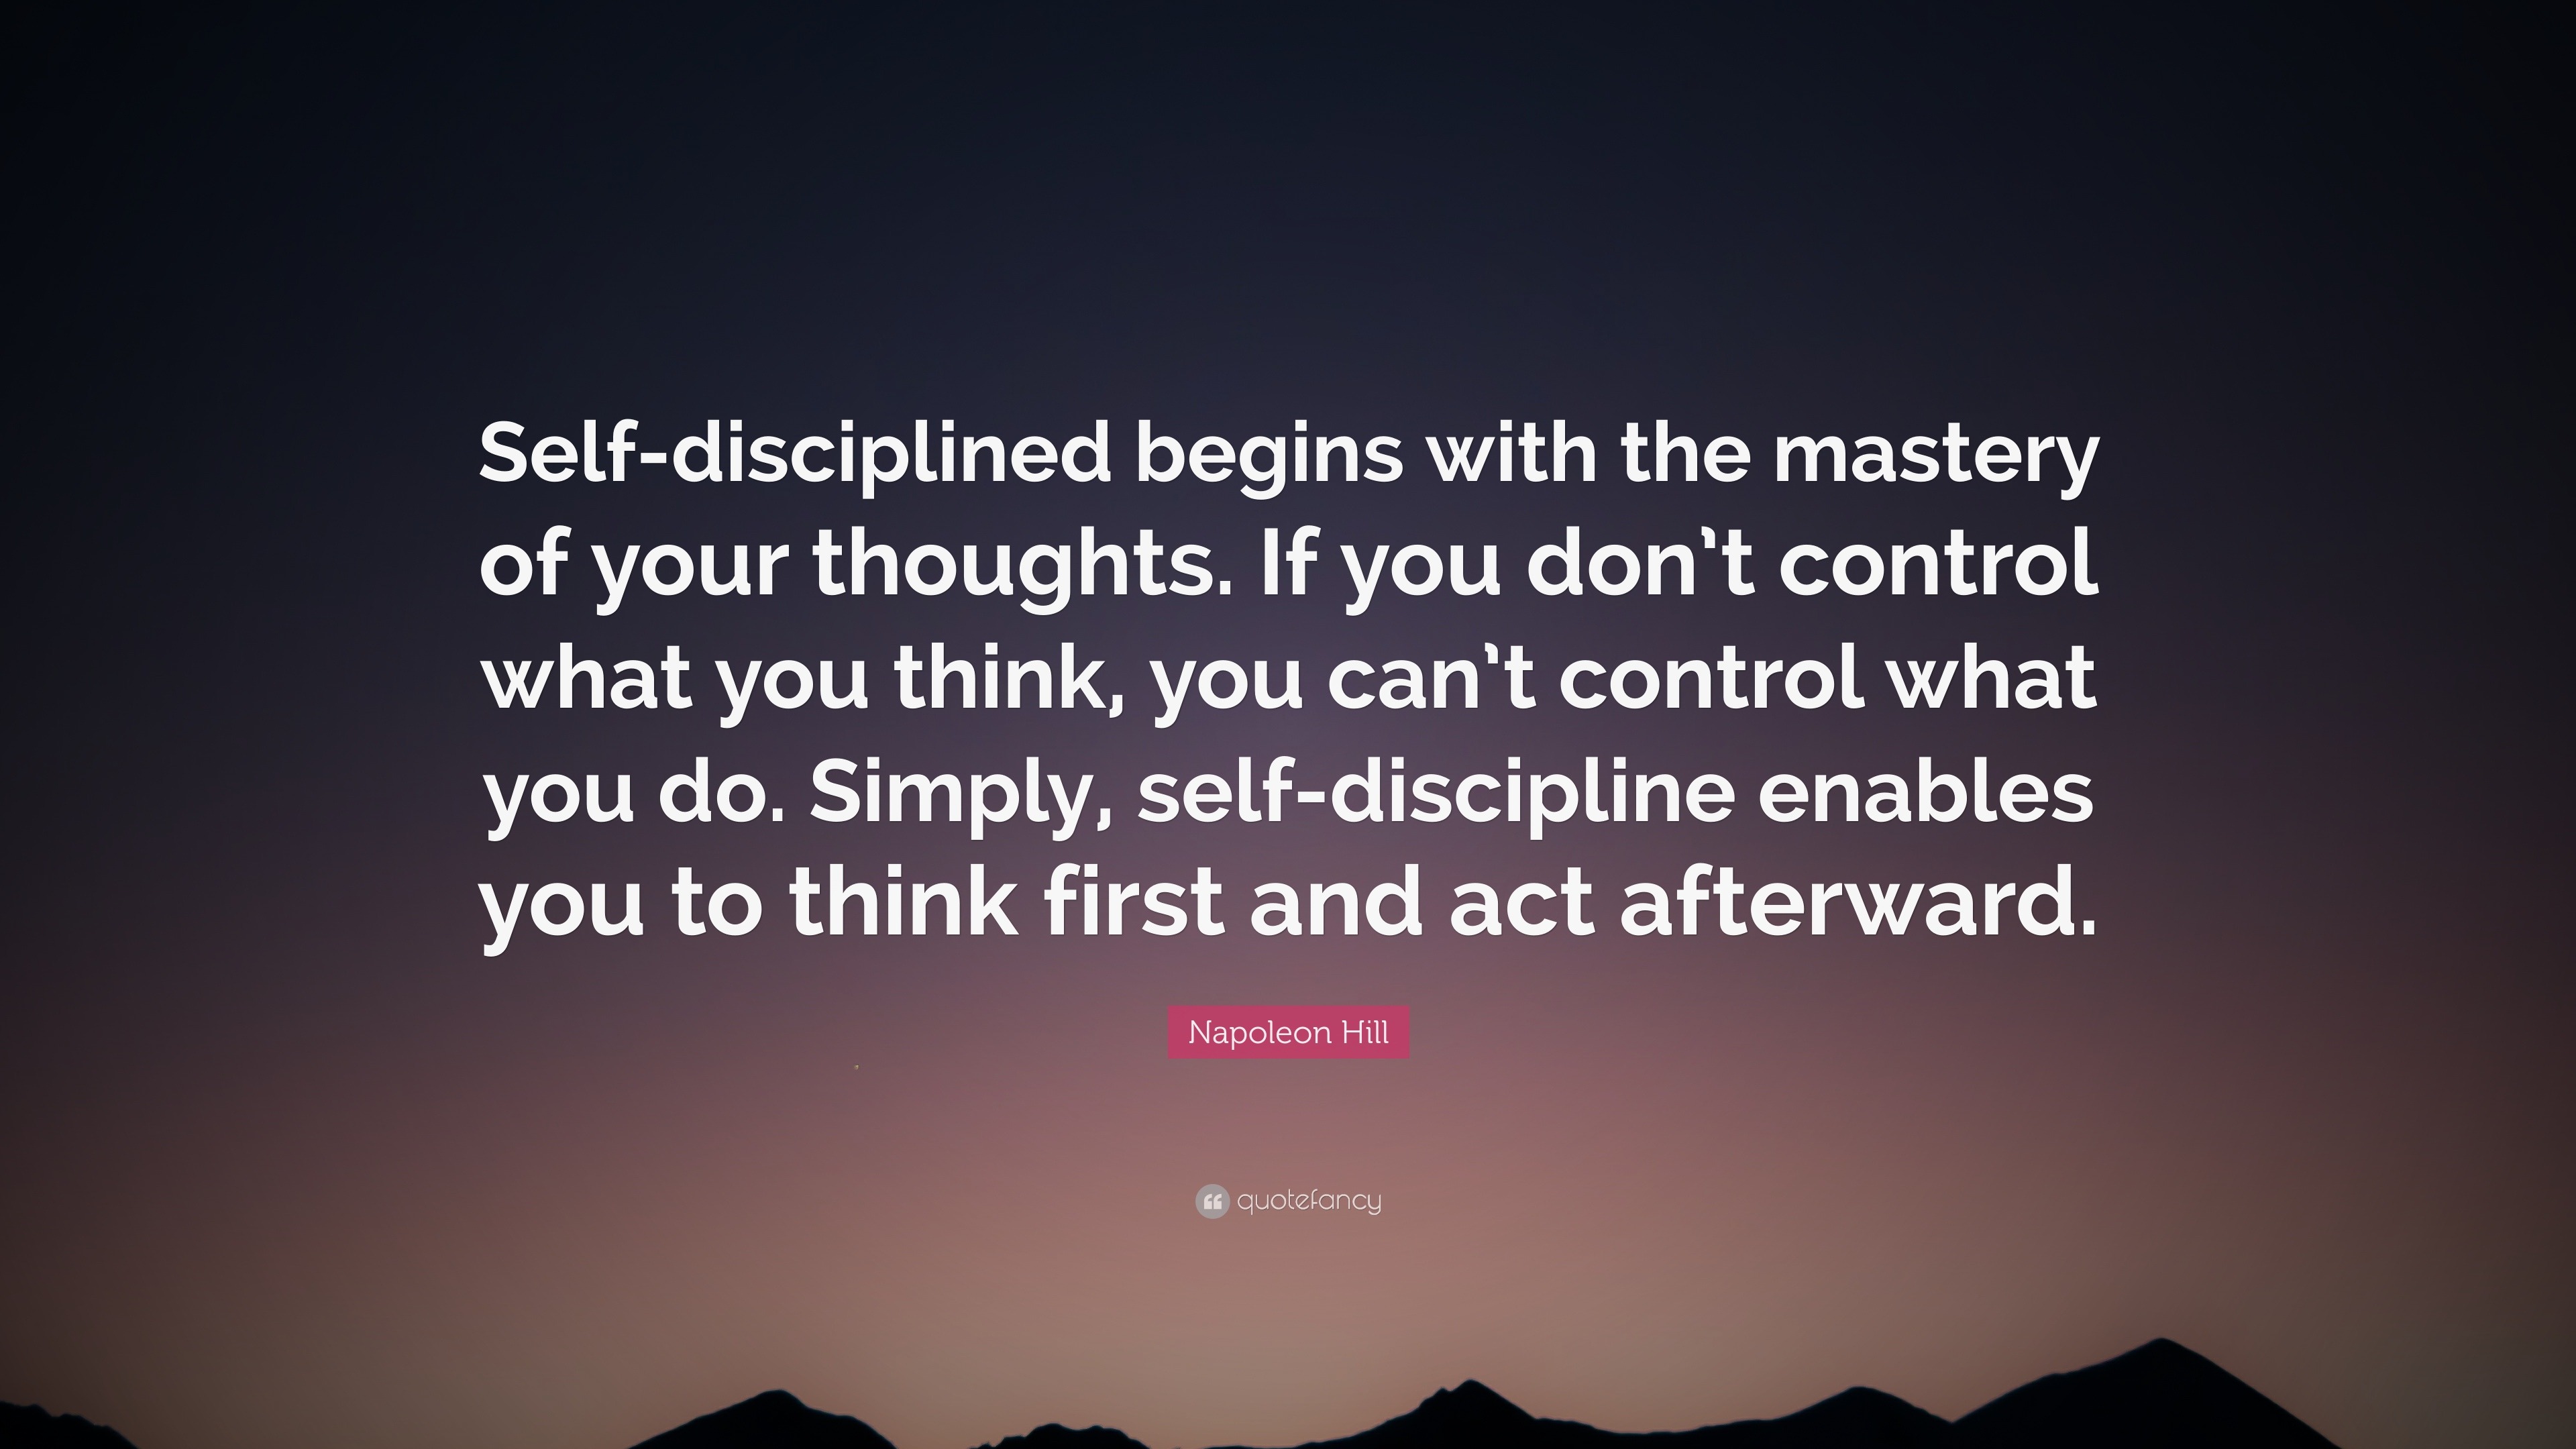 Napoleon Hill Quote: “Self-disciplined begins with the mastery of your ...